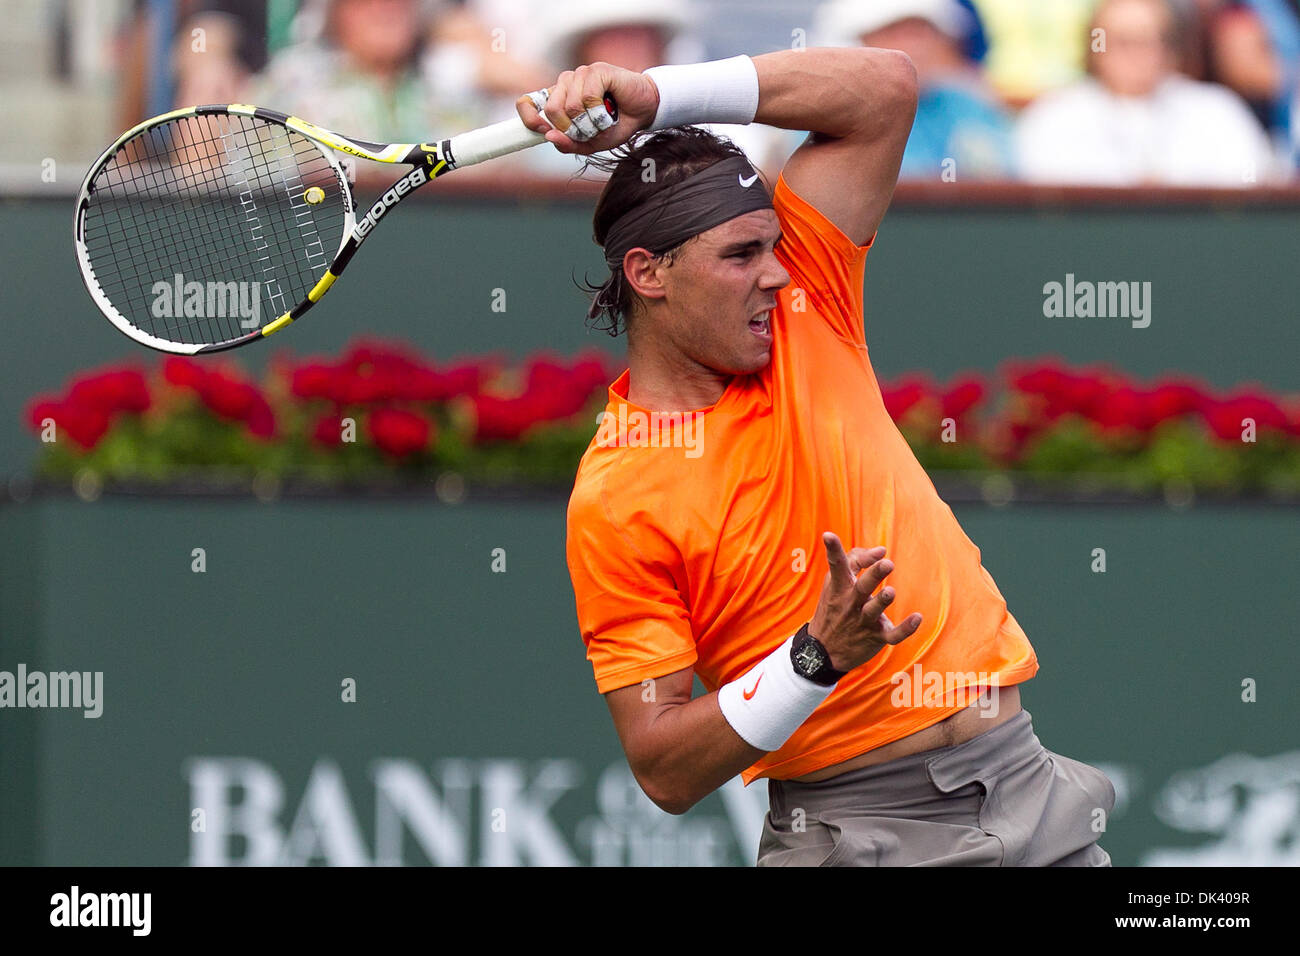 Mar. 14, 2011 - Indian Wells, California, U.S - Rafael Nadal (ESP) in action during the men's third round match of the 2011 BNP Paribas Open held at the Indian Wells Tennis Garden in Indian Wells, California. Nadal won with a score of 6-3, 6-1  (Credit Image: © Gerry Maceda/Southcreek Global/ZUMAPRESS.com) Stock Photo